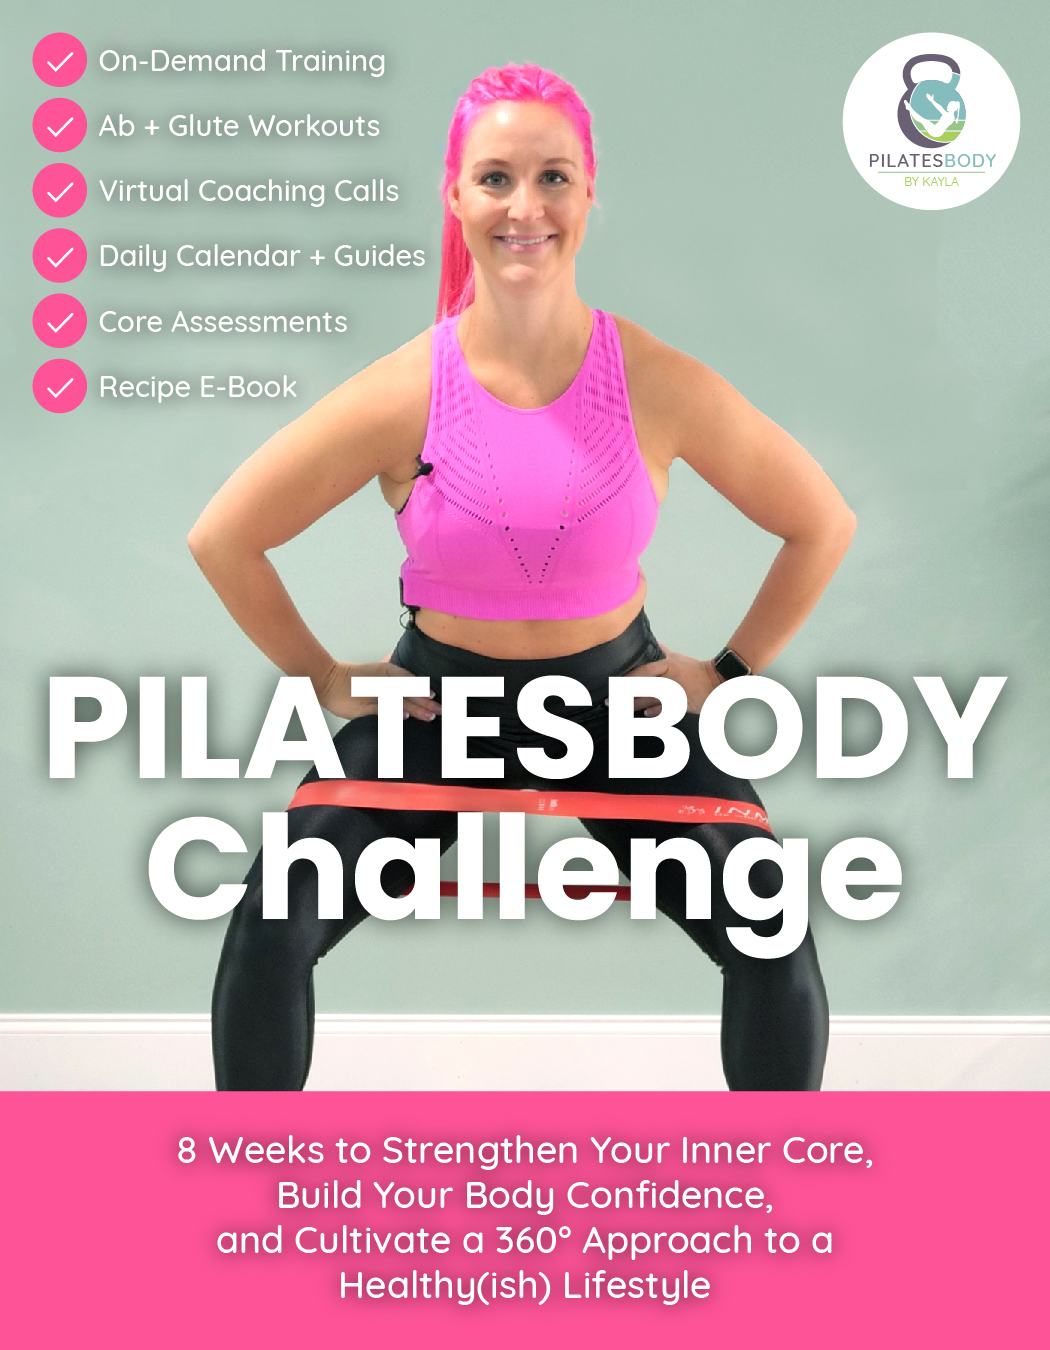 Challenging total body Pilates workout - Pilates Live